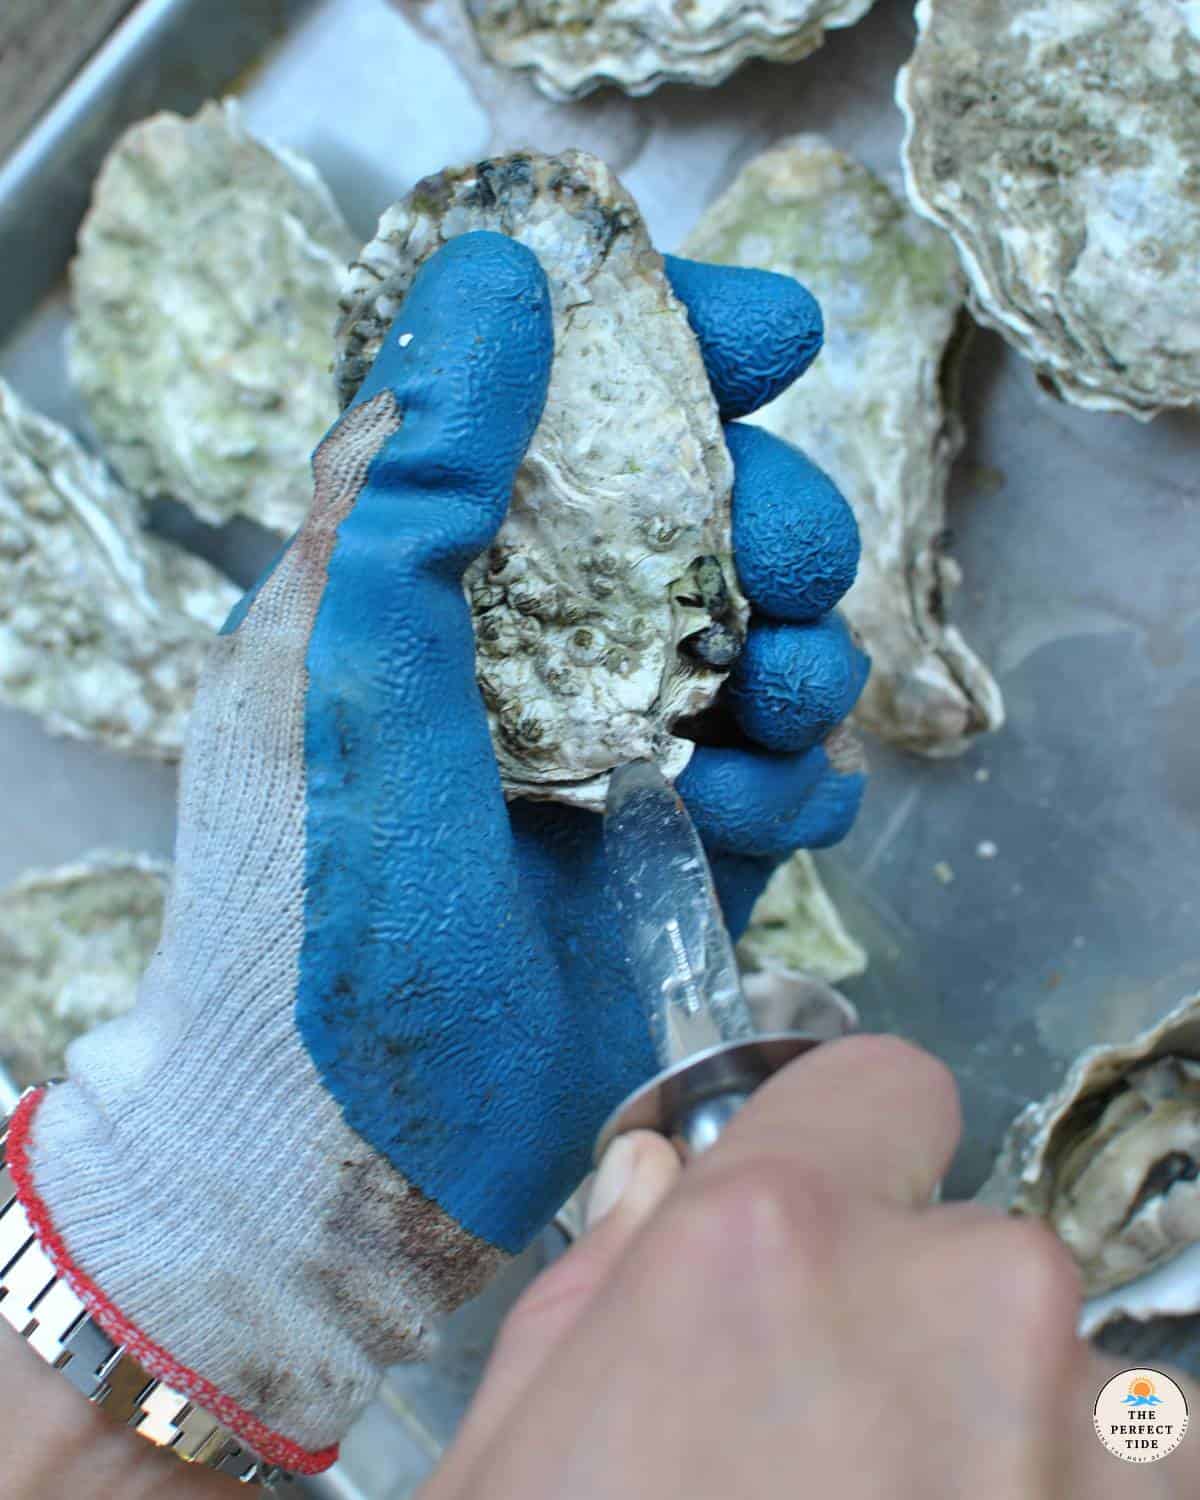 opening oysters with an oyster knife